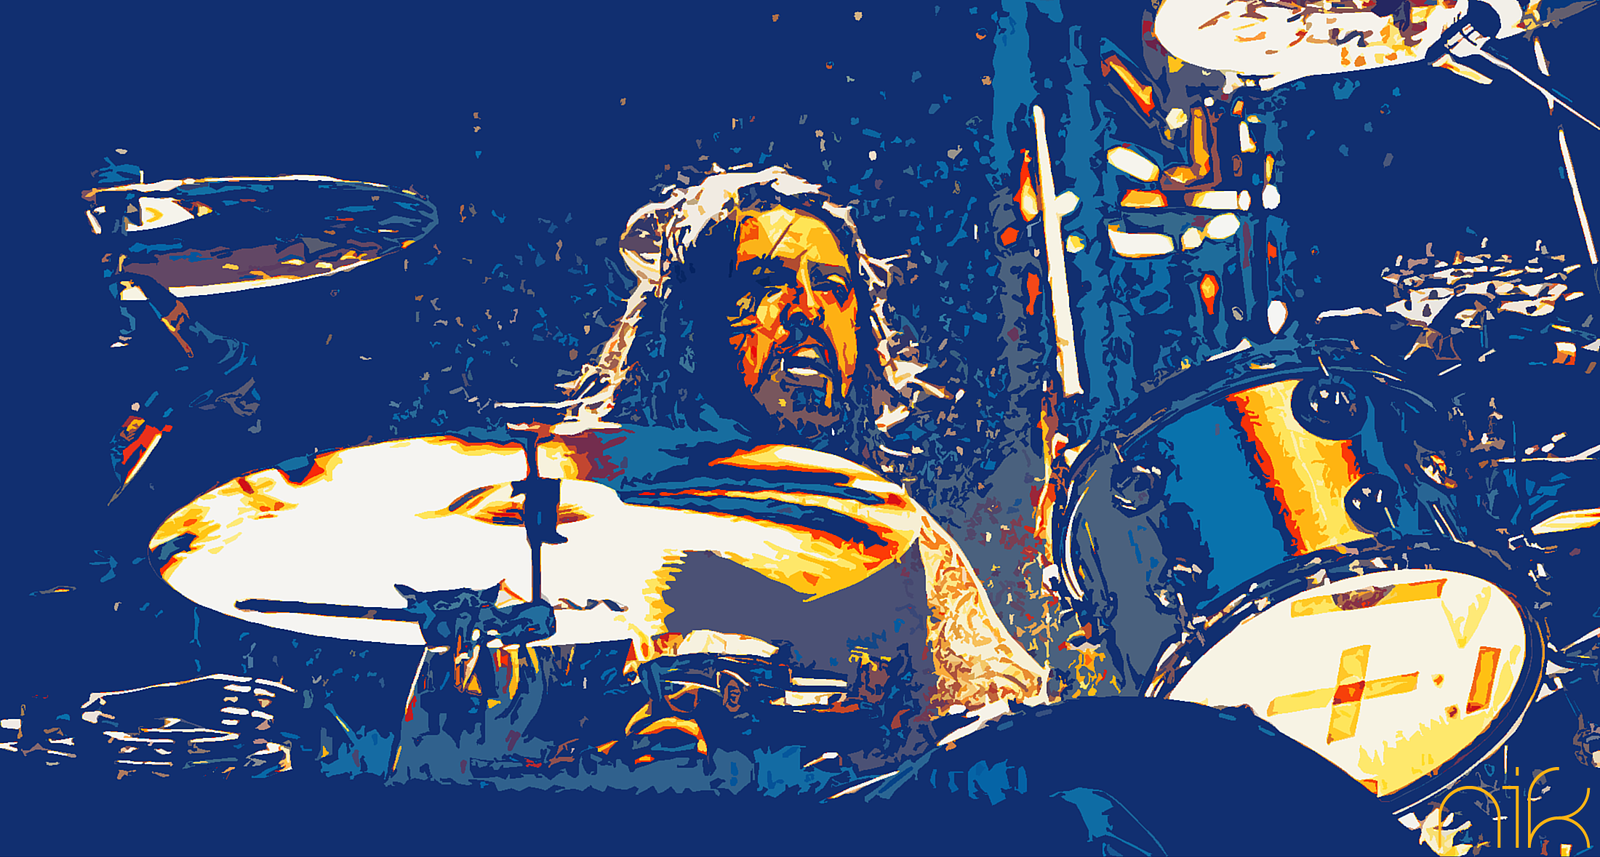 Песня фонотека. Dave Grohl Drums. Дейв Грол обои. Dave Grohl Wallpaper. Dave Grohl LP.